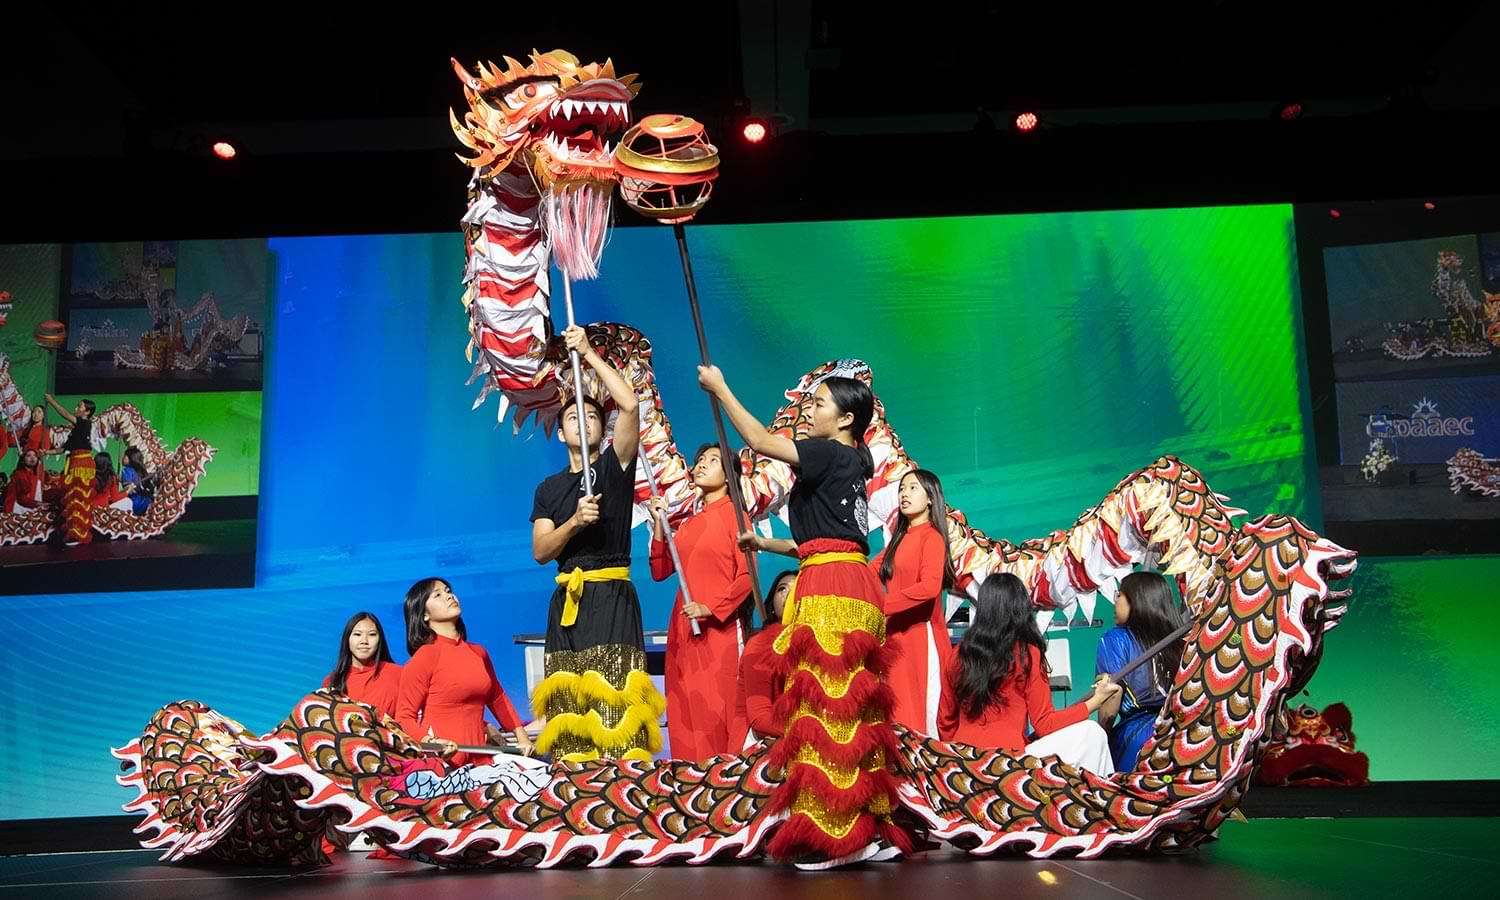 La Quinta High School’s Vietnamese Student Association performing at the Second General Session of the 2022 Annual Education Conference